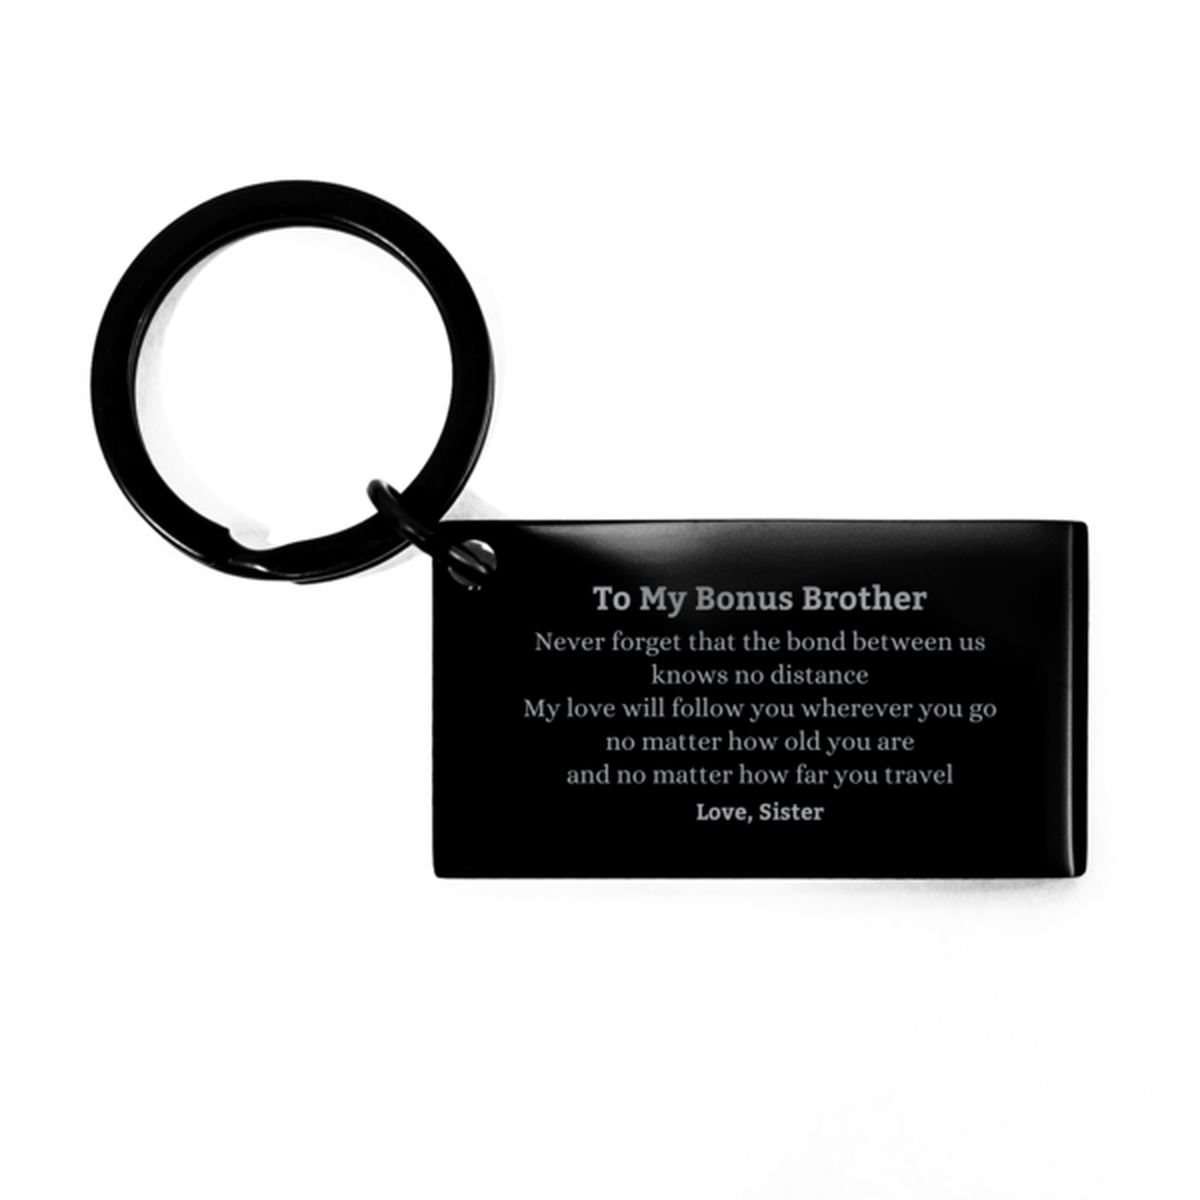 Bonus Brother Birthday Gifts from Sister, Adjustable Keychain for Bonus Brother Christmas Graduation Unique Gifts Bonus Brother Never forget that the bond between us knows no distance. Love, Sister